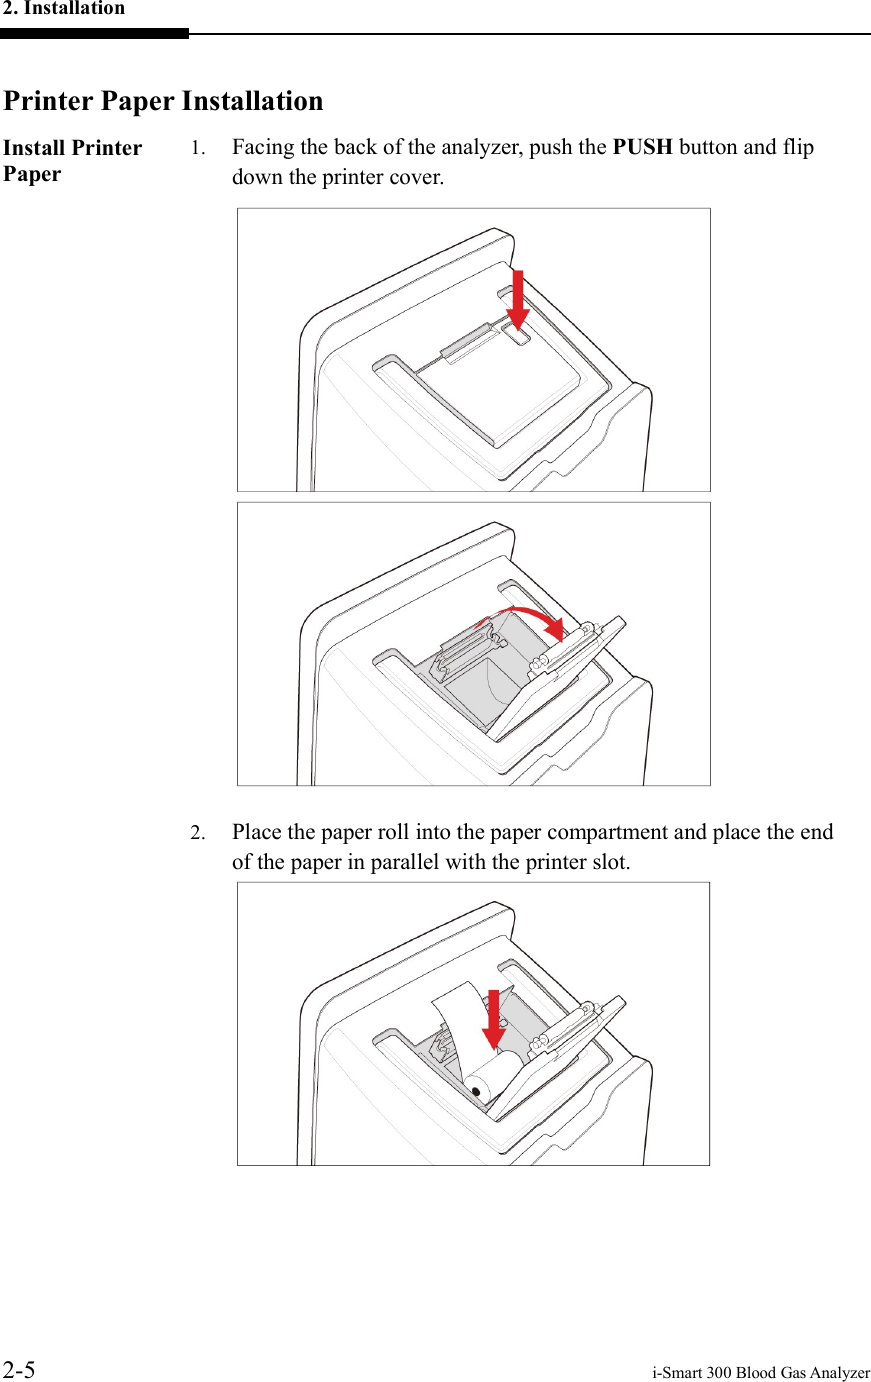 2. Installation     2-5    i-Smart 300 Blood Gas Analyzer  Printer Paper Installation Install Printer Paper 1. Facing the back of the analyzer, push the PUSH button and flip down the printer cover.   2. Place the paper roll into the paper compartment and place the end of the paper in parallel with the printer slot.      